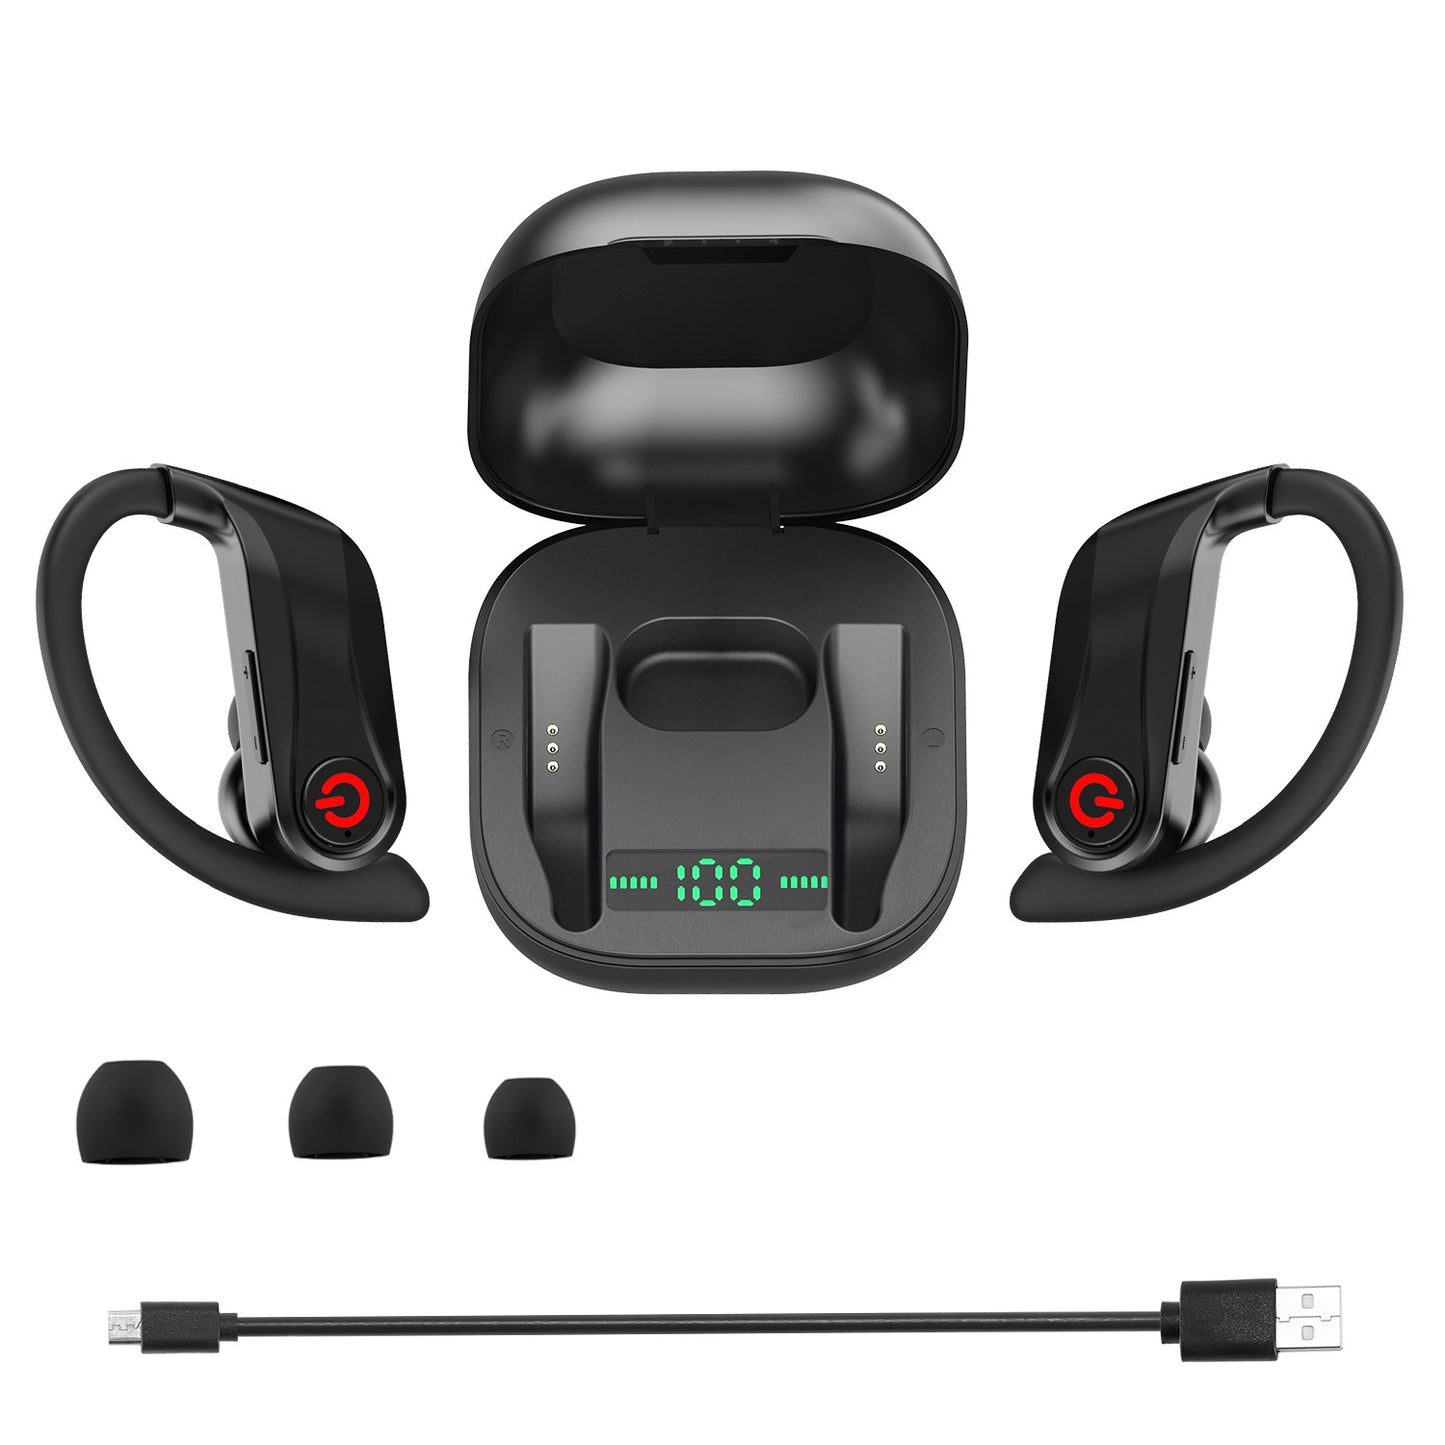 True Wireless Earbuds TWS Stereo Earphones In-Ear Wireless V5.0 Headsets with LED Display Magnetic Charging Case Built-in Mic with Deep Bass IPX5 Wate - Black -